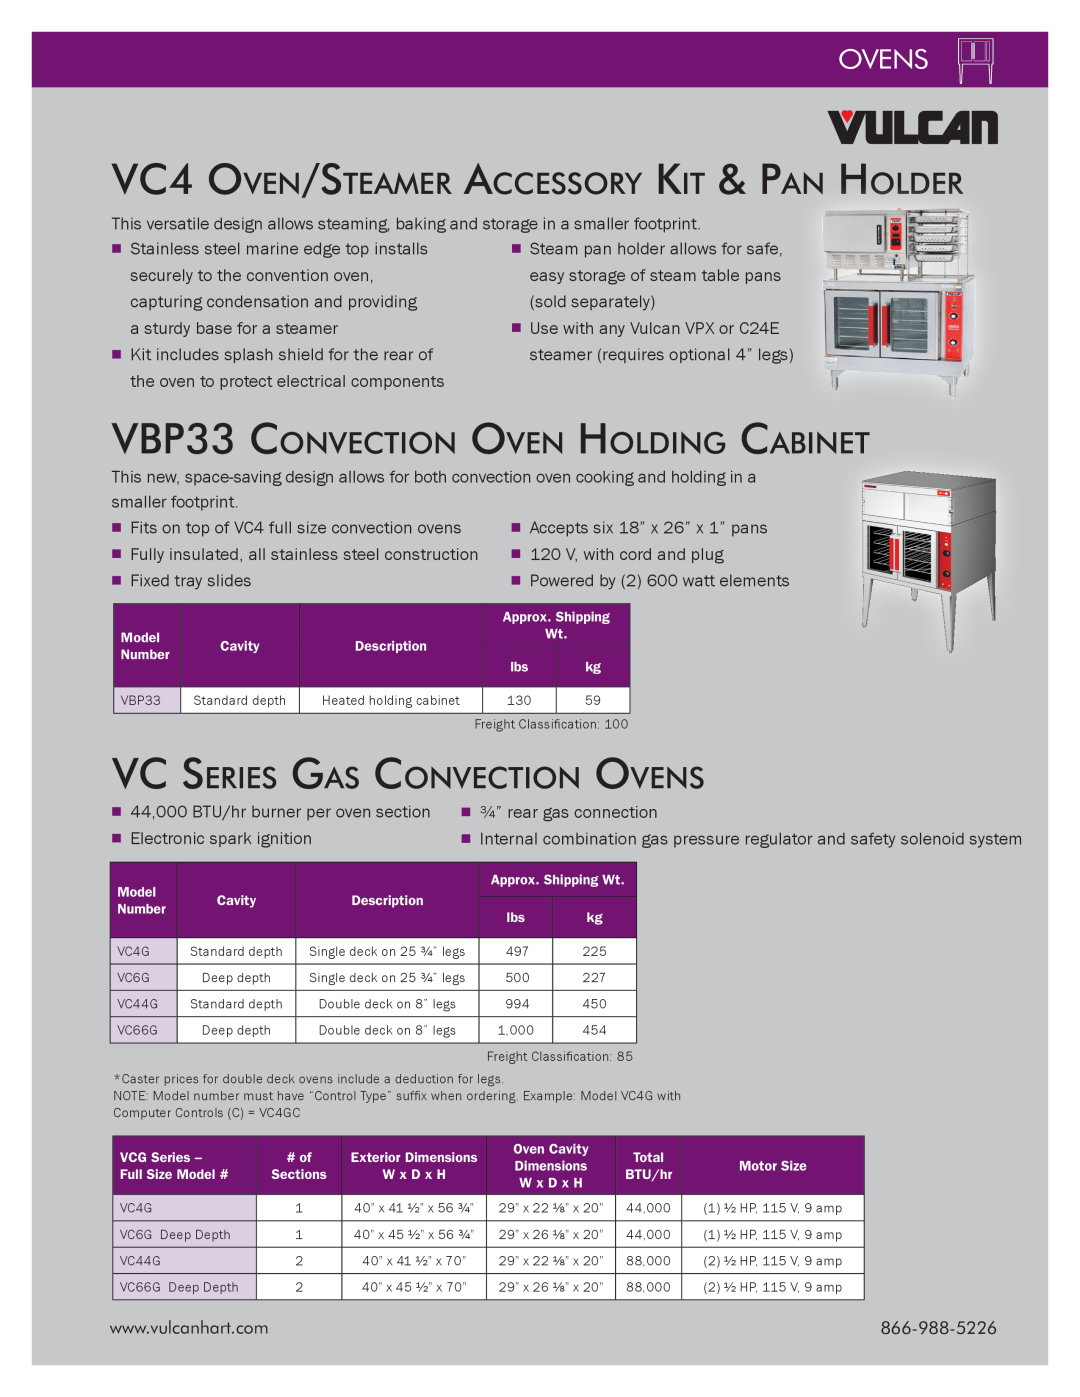 Vulcan-Hart VC44GD manual VC4 Oven/Steamer Accessory Kit & Pan Holder, VBP33 Convection Oven Holding Cabinet, Ovens 